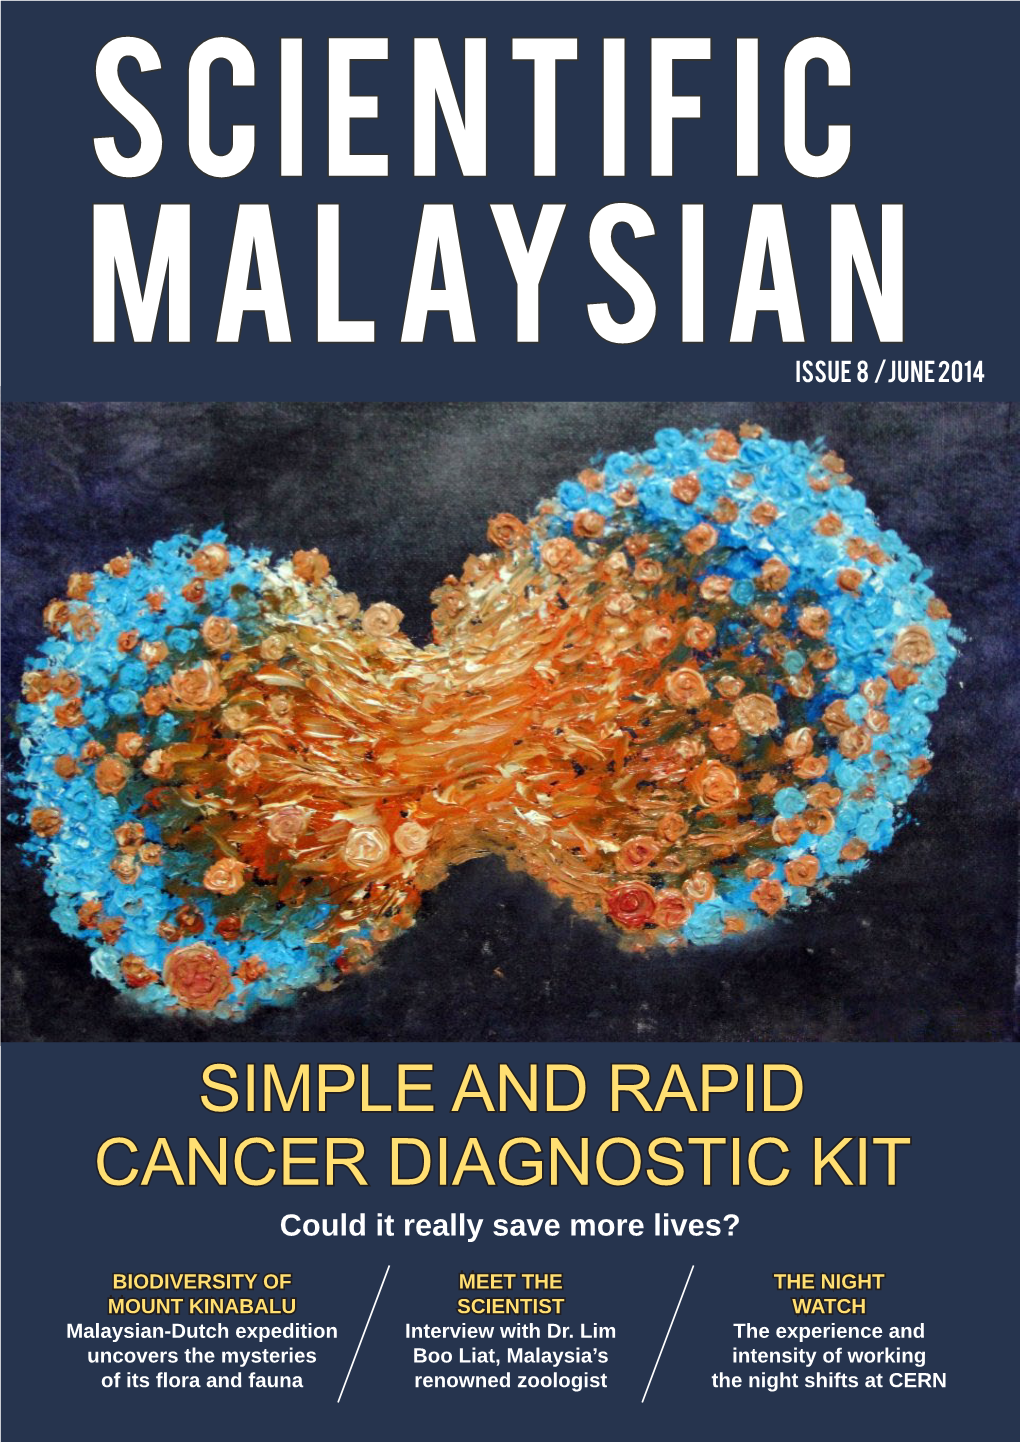 Simple and Rapid Cancer Diagnostic Kit Could It Really Save More Lives?